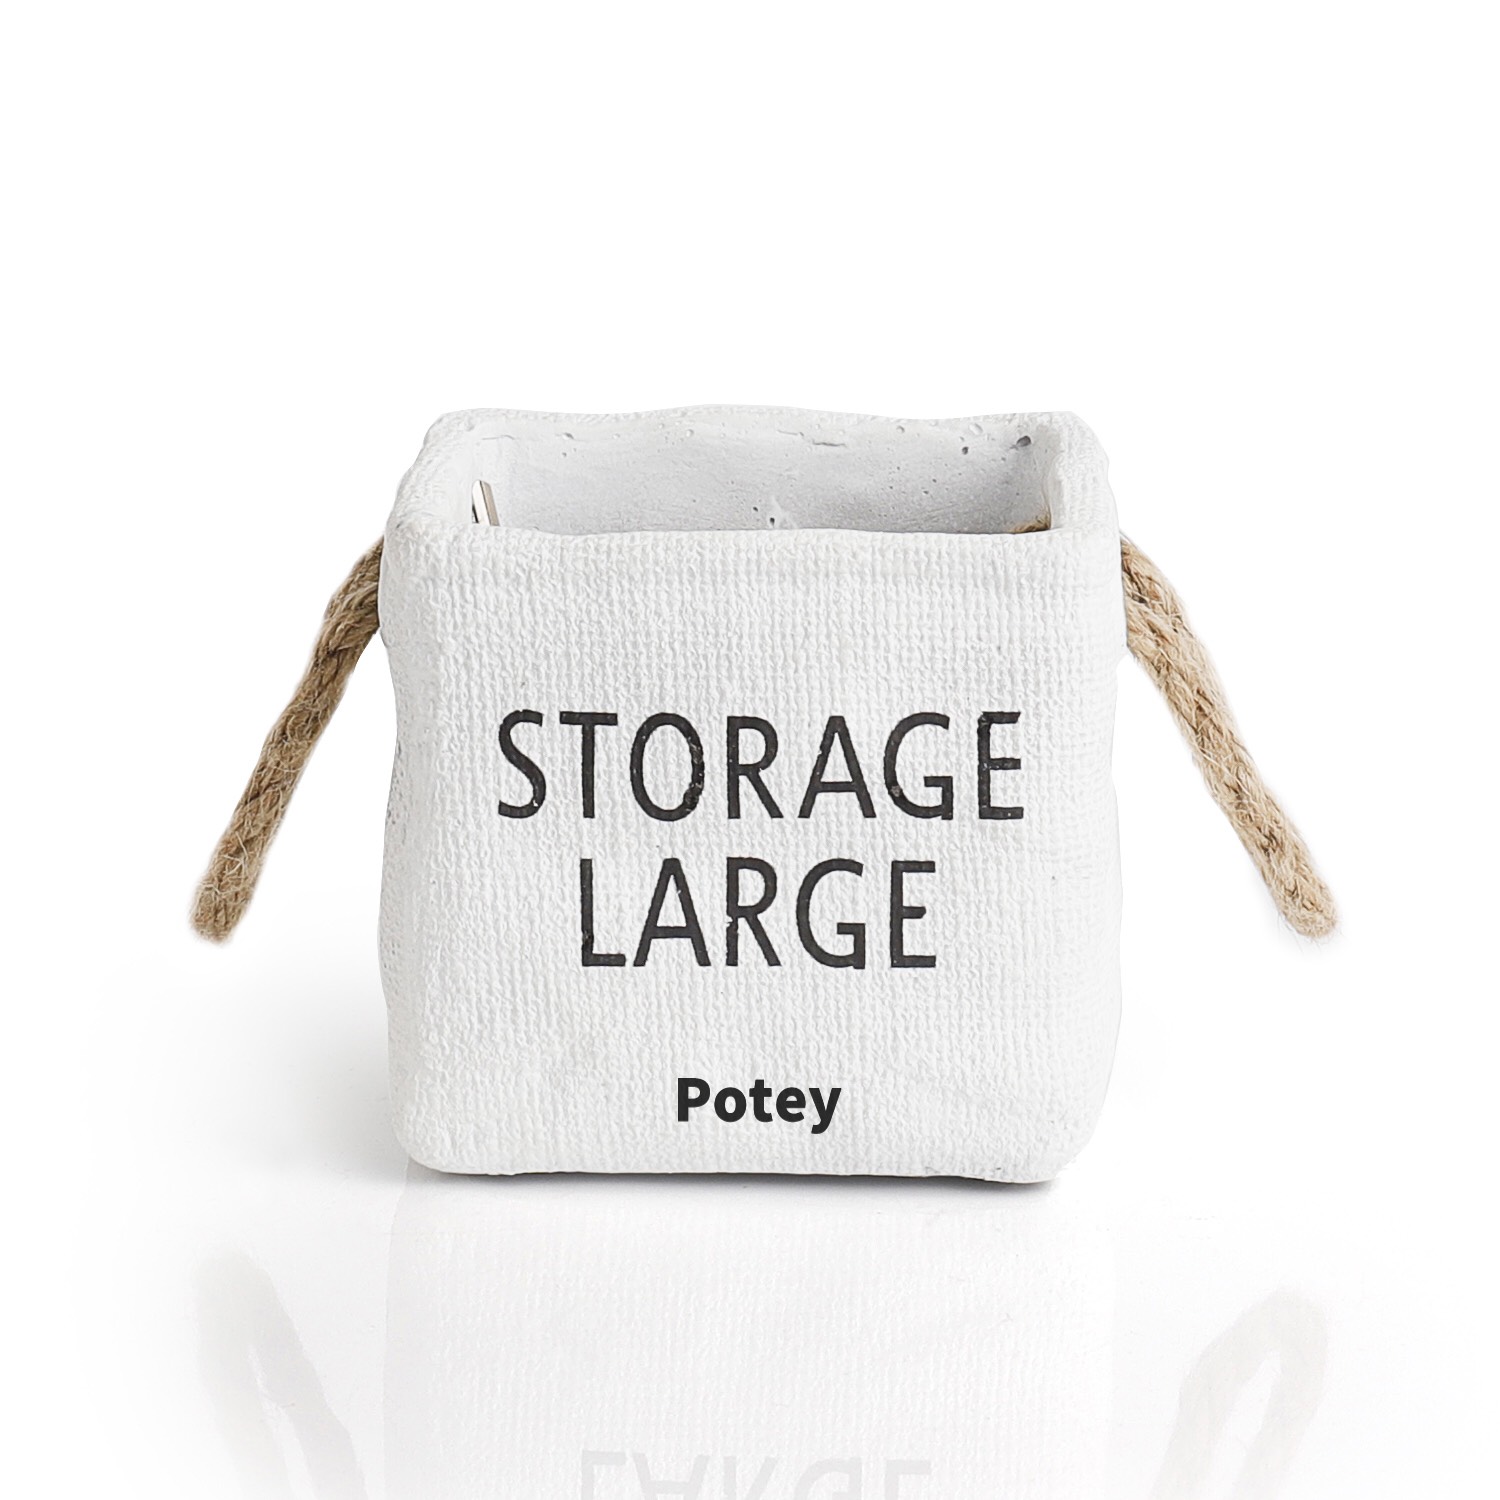 Featured image for “Large Canvas Storage Bag”